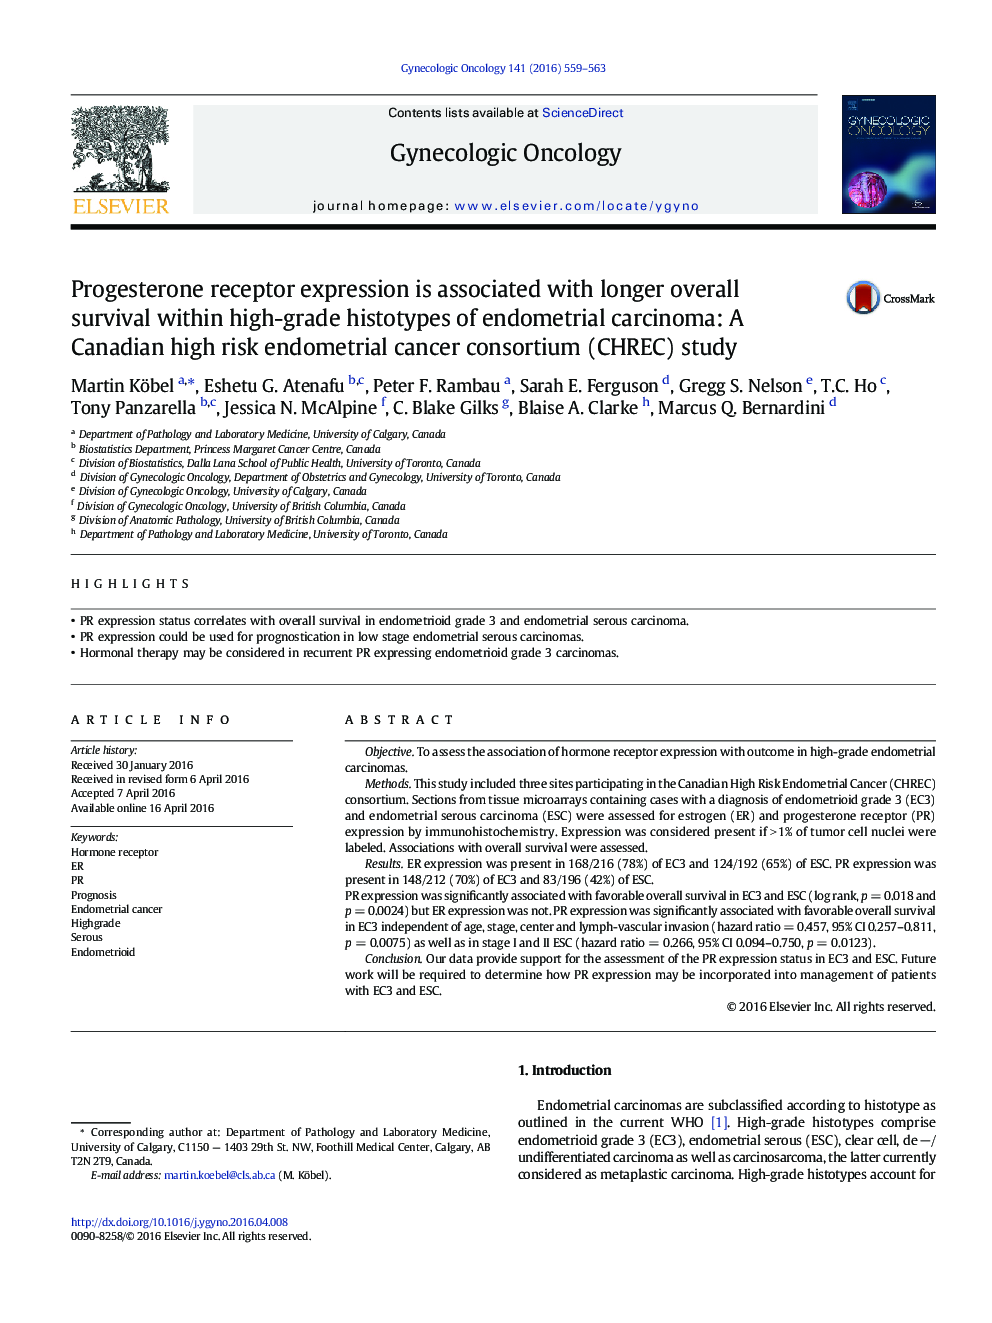 Progesterone receptor expression is associated with longer overall survival within high-grade histotypes of endometrial carcinoma: A Canadian high risk endometrial cancer consortium (CHREC) study